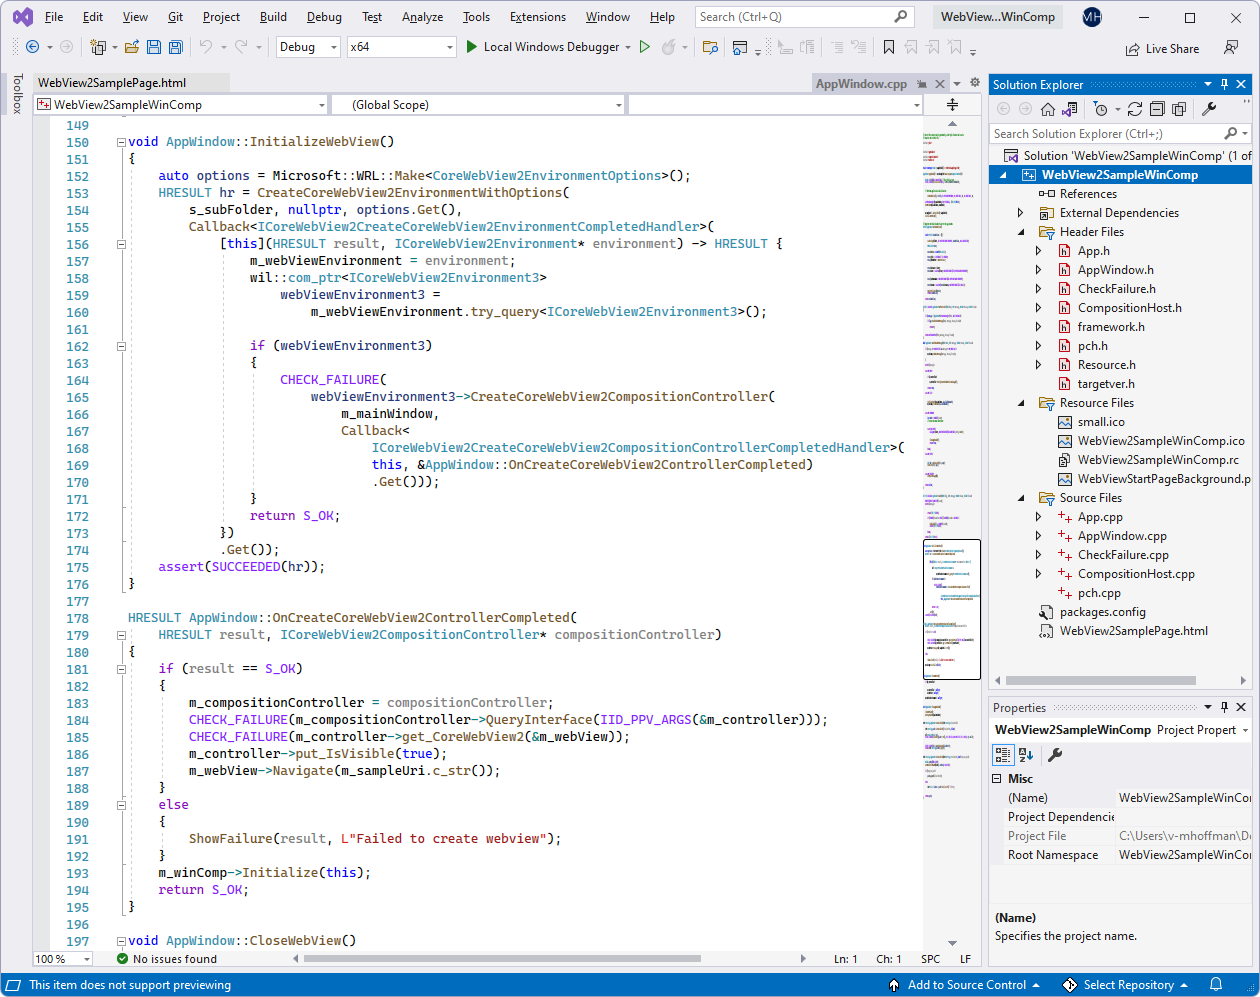 The WebView2SampleWinComp project in Visual Studio